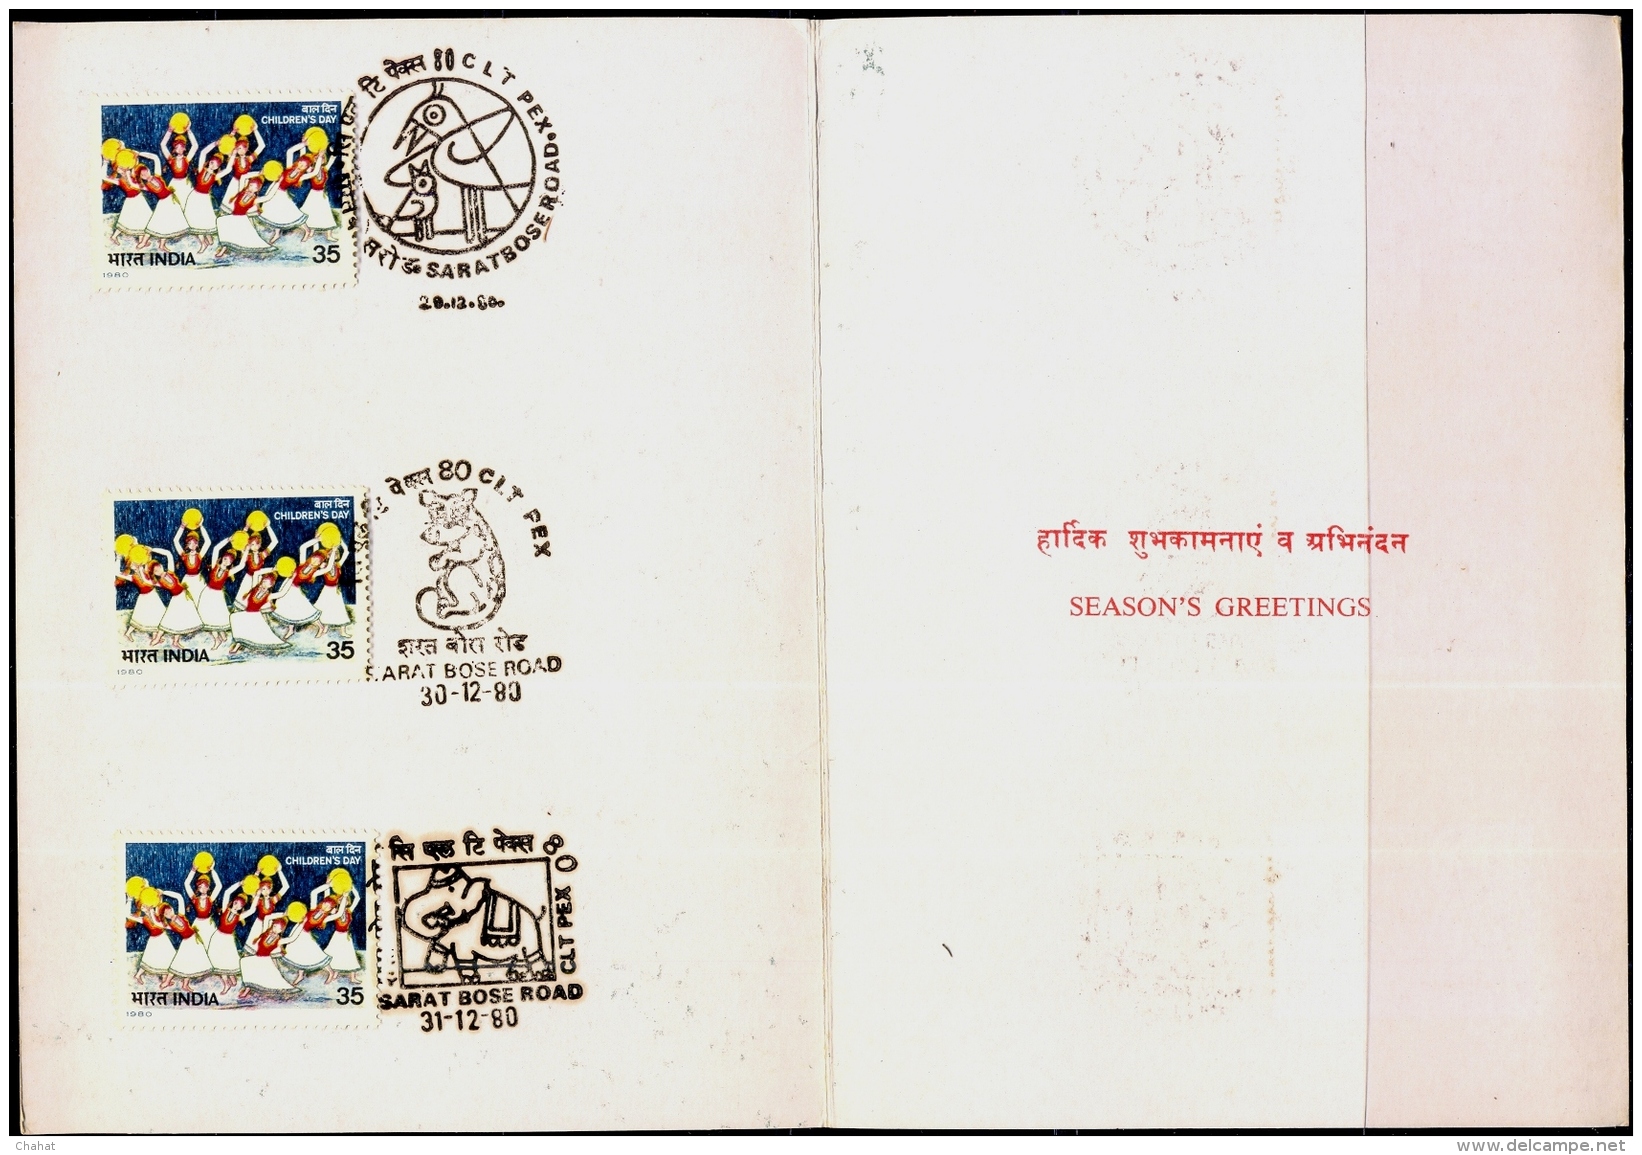 CHILDRENS DAY-1980-INDIA POSTAGE GREETING CARD WITH EVENT CANCELLATIONS &amp; BOOKLET-ERROR-EXTREMELY SCARCE-MNH-M-159 - Variétés Et Curiosités